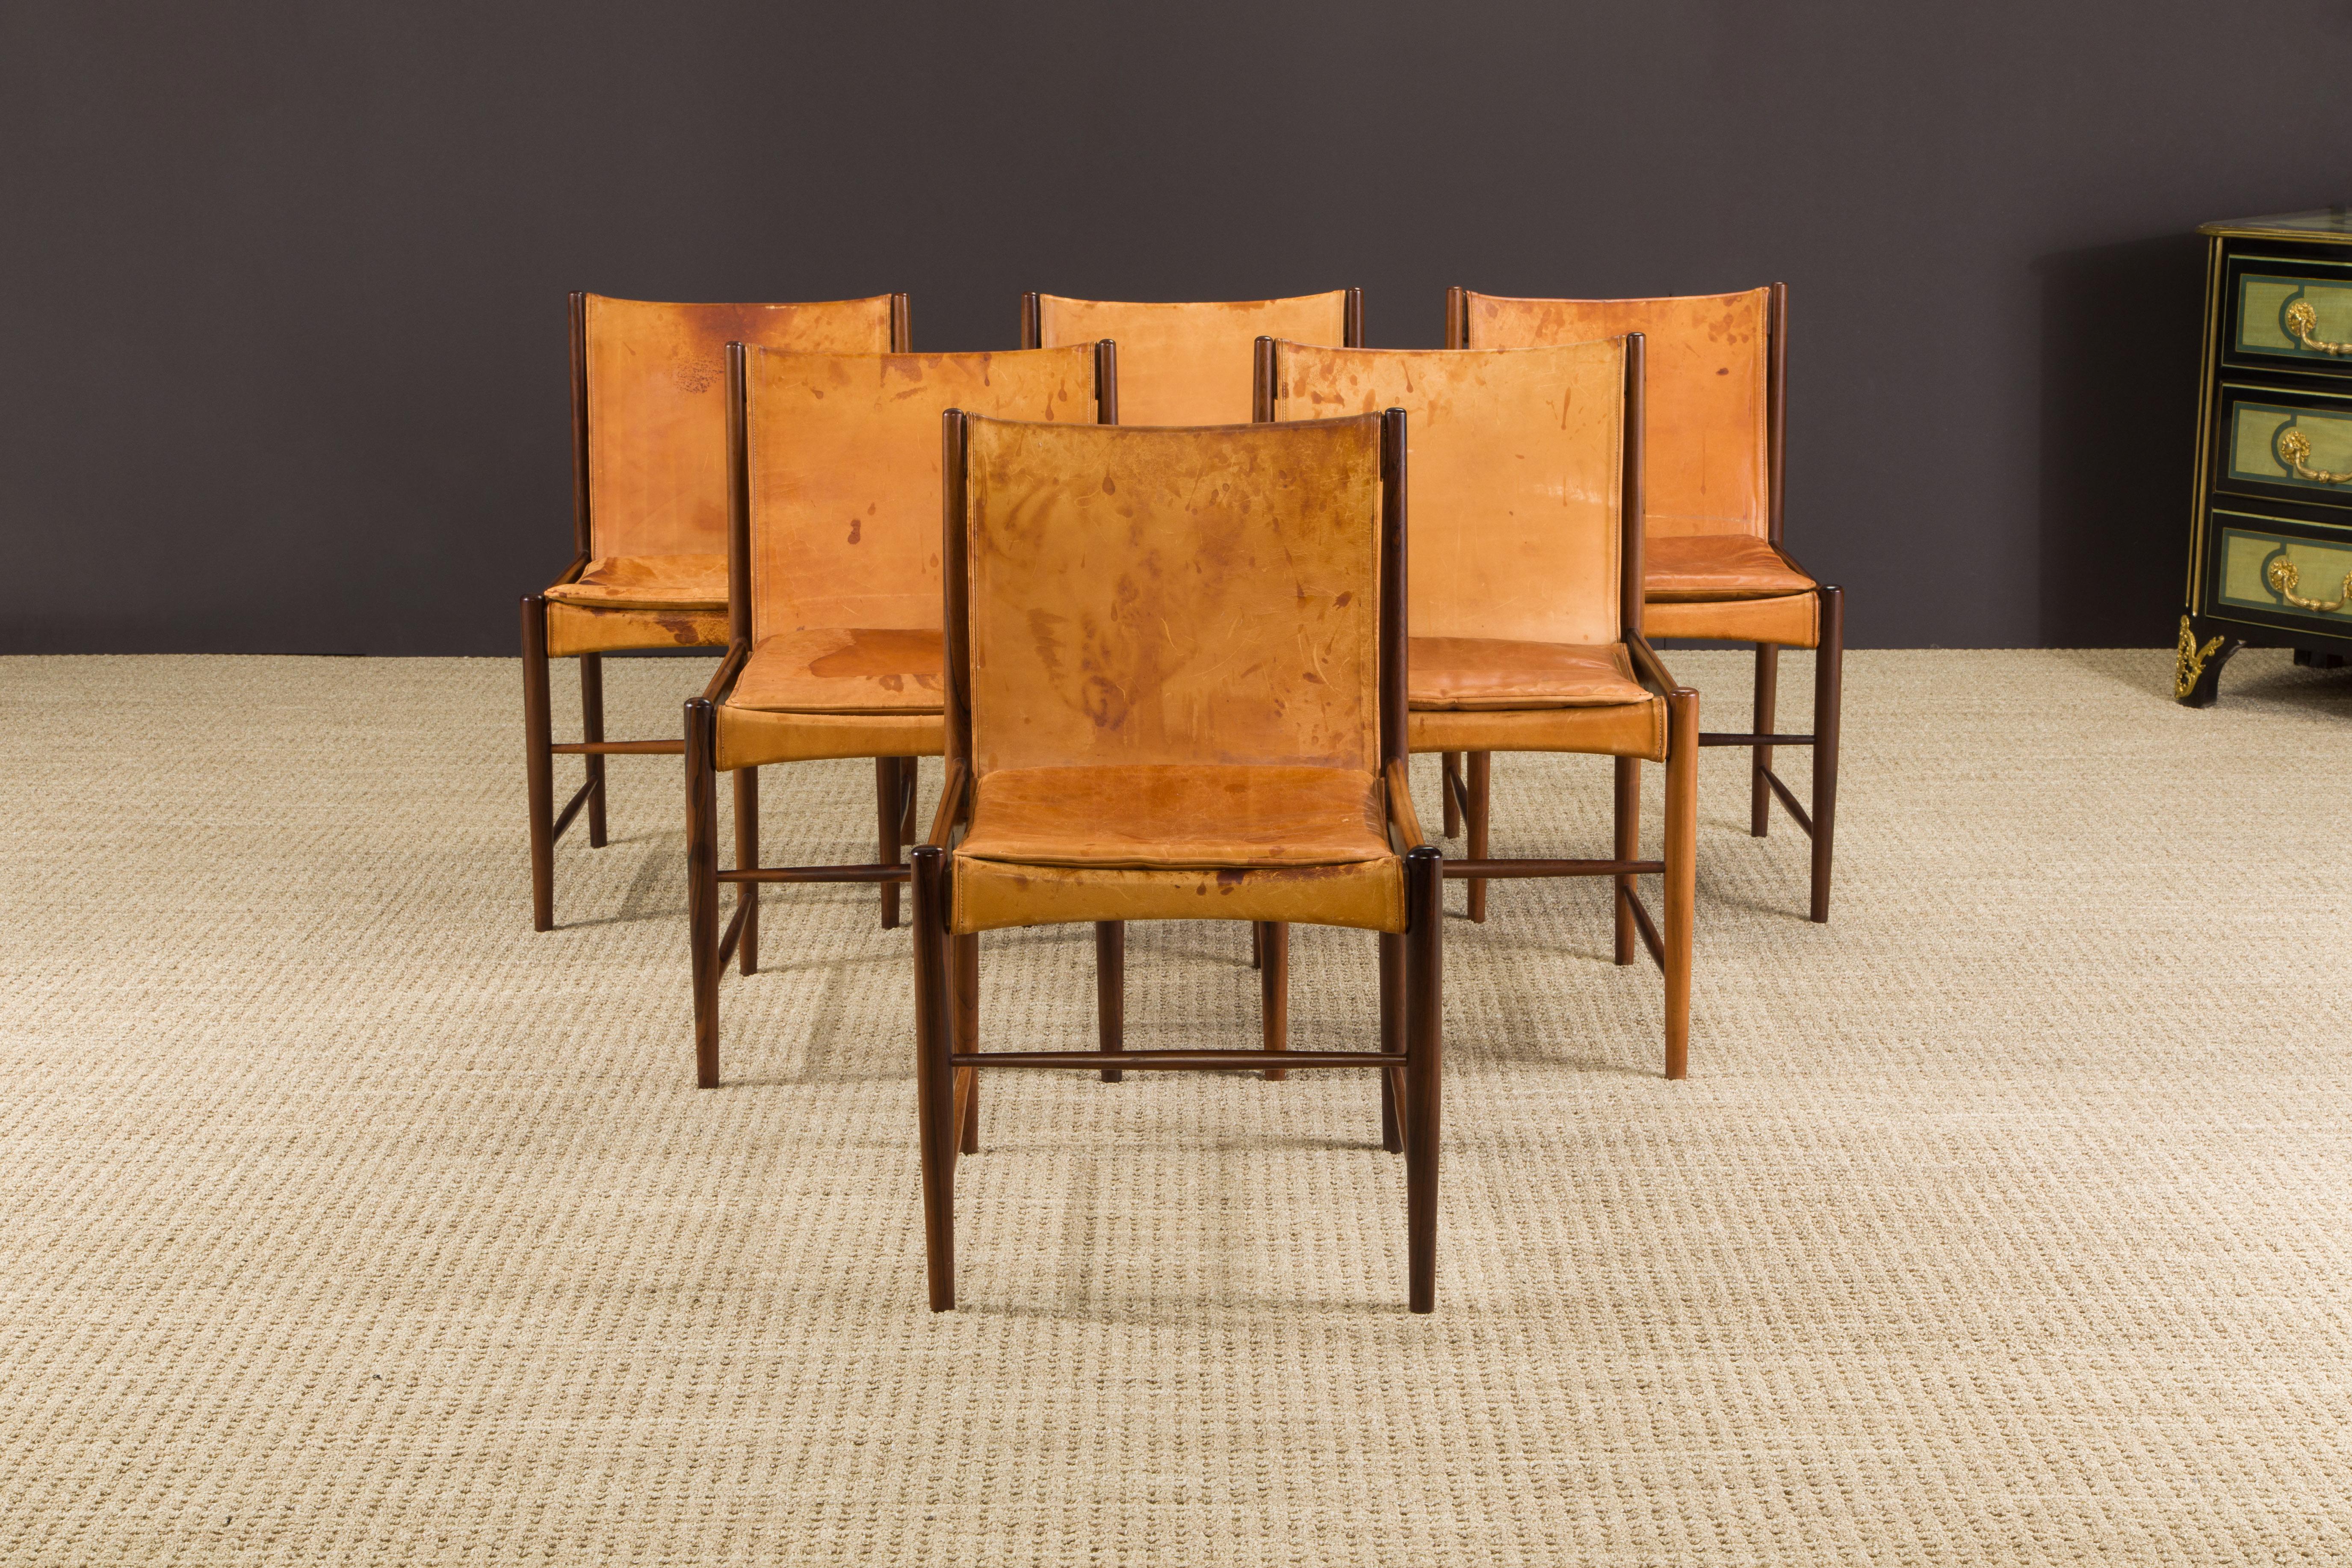 An important set of six (6) Jacaranda Rosewood 'Cantu' dining chairs by Sergio Rodrigues for Oca Arquitetura e Interiores in original leather, signed with labels and Brazilian tax stamps under each chair as can be seen in the photos, this detail is